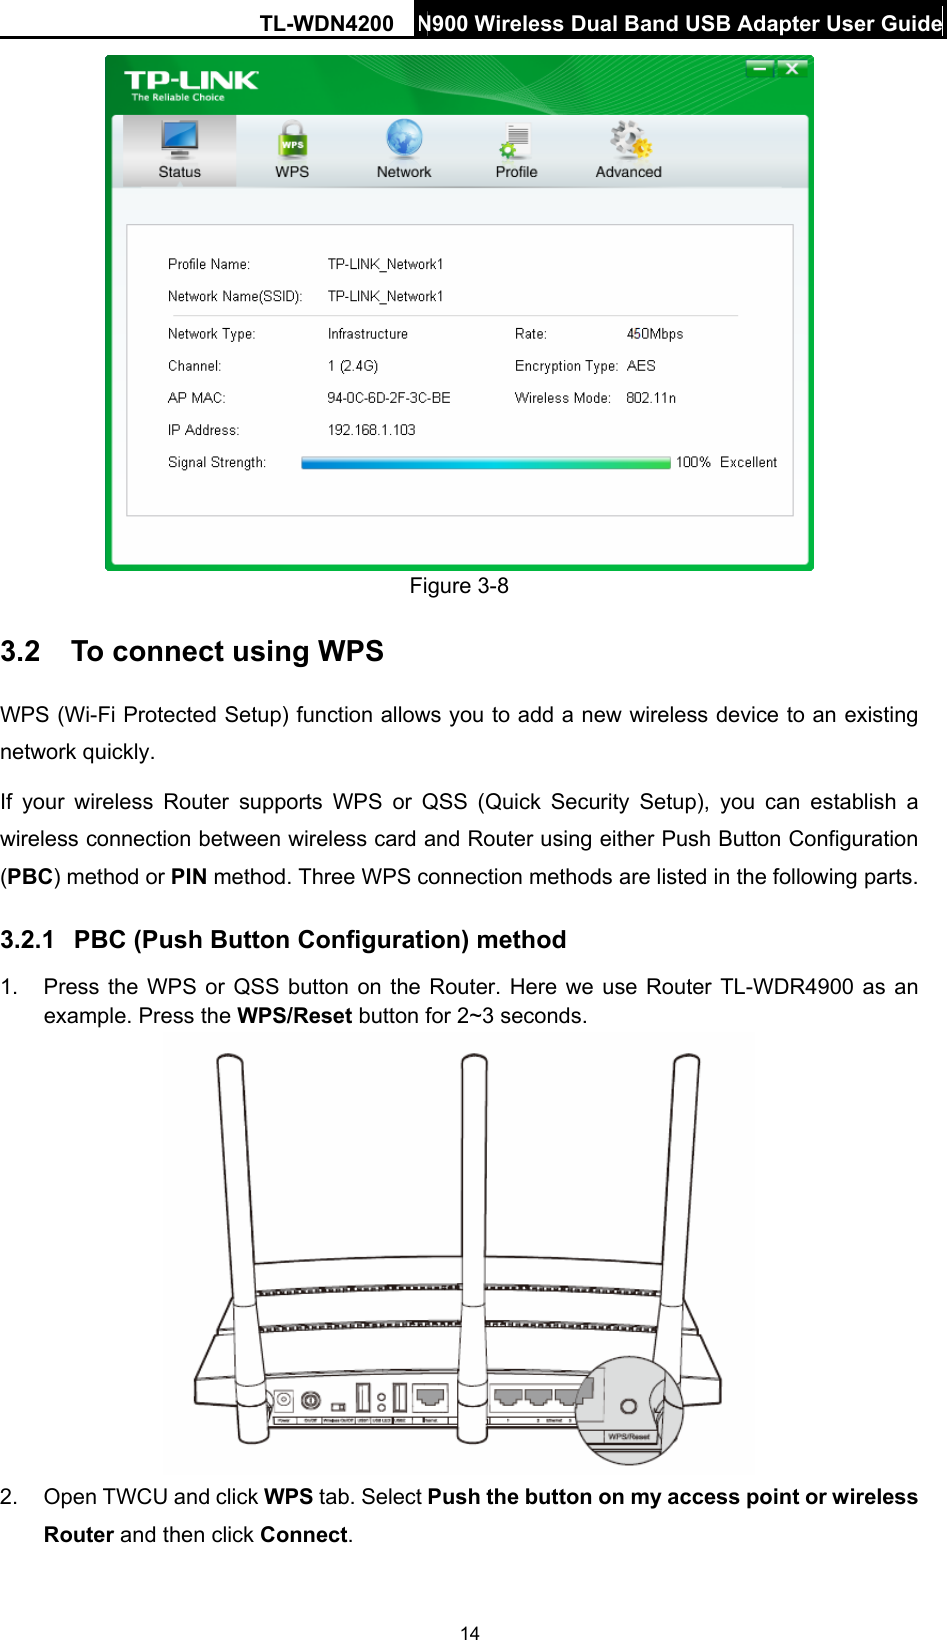 TL-WDN4200 N900 Wireless Dual Band USB Adapter User Guide  14 Figure 3-8 3.2  To connect using WPS WPS (Wi-Fi Protected Setup) function allows you to add a new wireless device to an existing network quickly. If your wireless Router supports WPS or QSS (Quick Security Setup), you can establish a wireless connection between wireless card and Router using either Push Button Configuration (PBC) method or PIN method. Three WPS connection methods are listed in the following parts. 3.2.1  PBC (Push Button Configuration) method 1.  Press the WPS or QSS button on the Router. Here we use Router TL-WDR4900 as an example. Press the WPS/Reset button for 2~3 seconds.  2.  Open TWCU and click WPS tab. Select Push the button on my access point or wireless Router and then click Connect.  